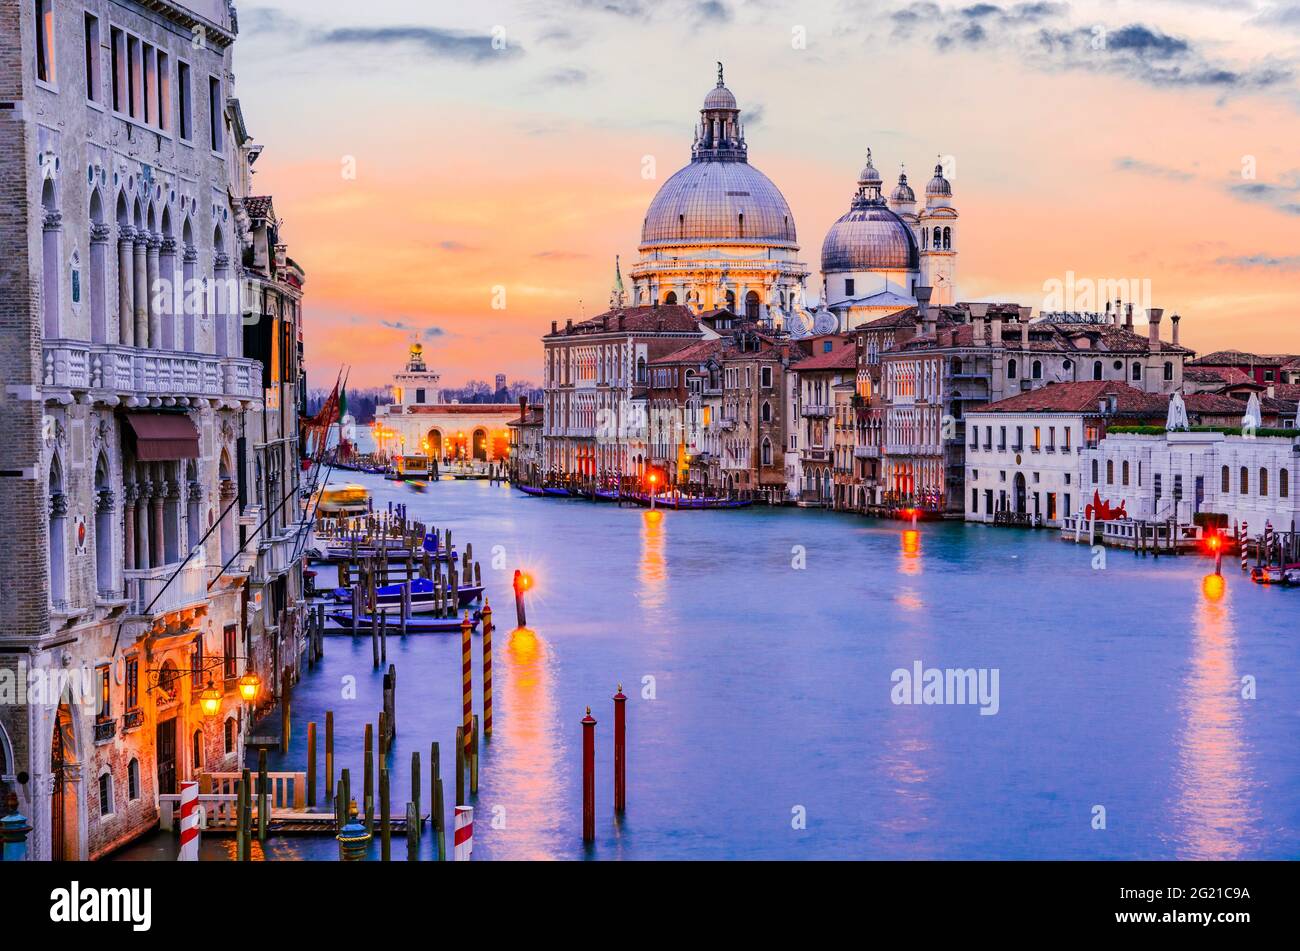 Venice, Italy. Gorgeous view of the Grand Canal and Basilica Santa Maria della Salute during sunset with amazing clouds. Stock Photo